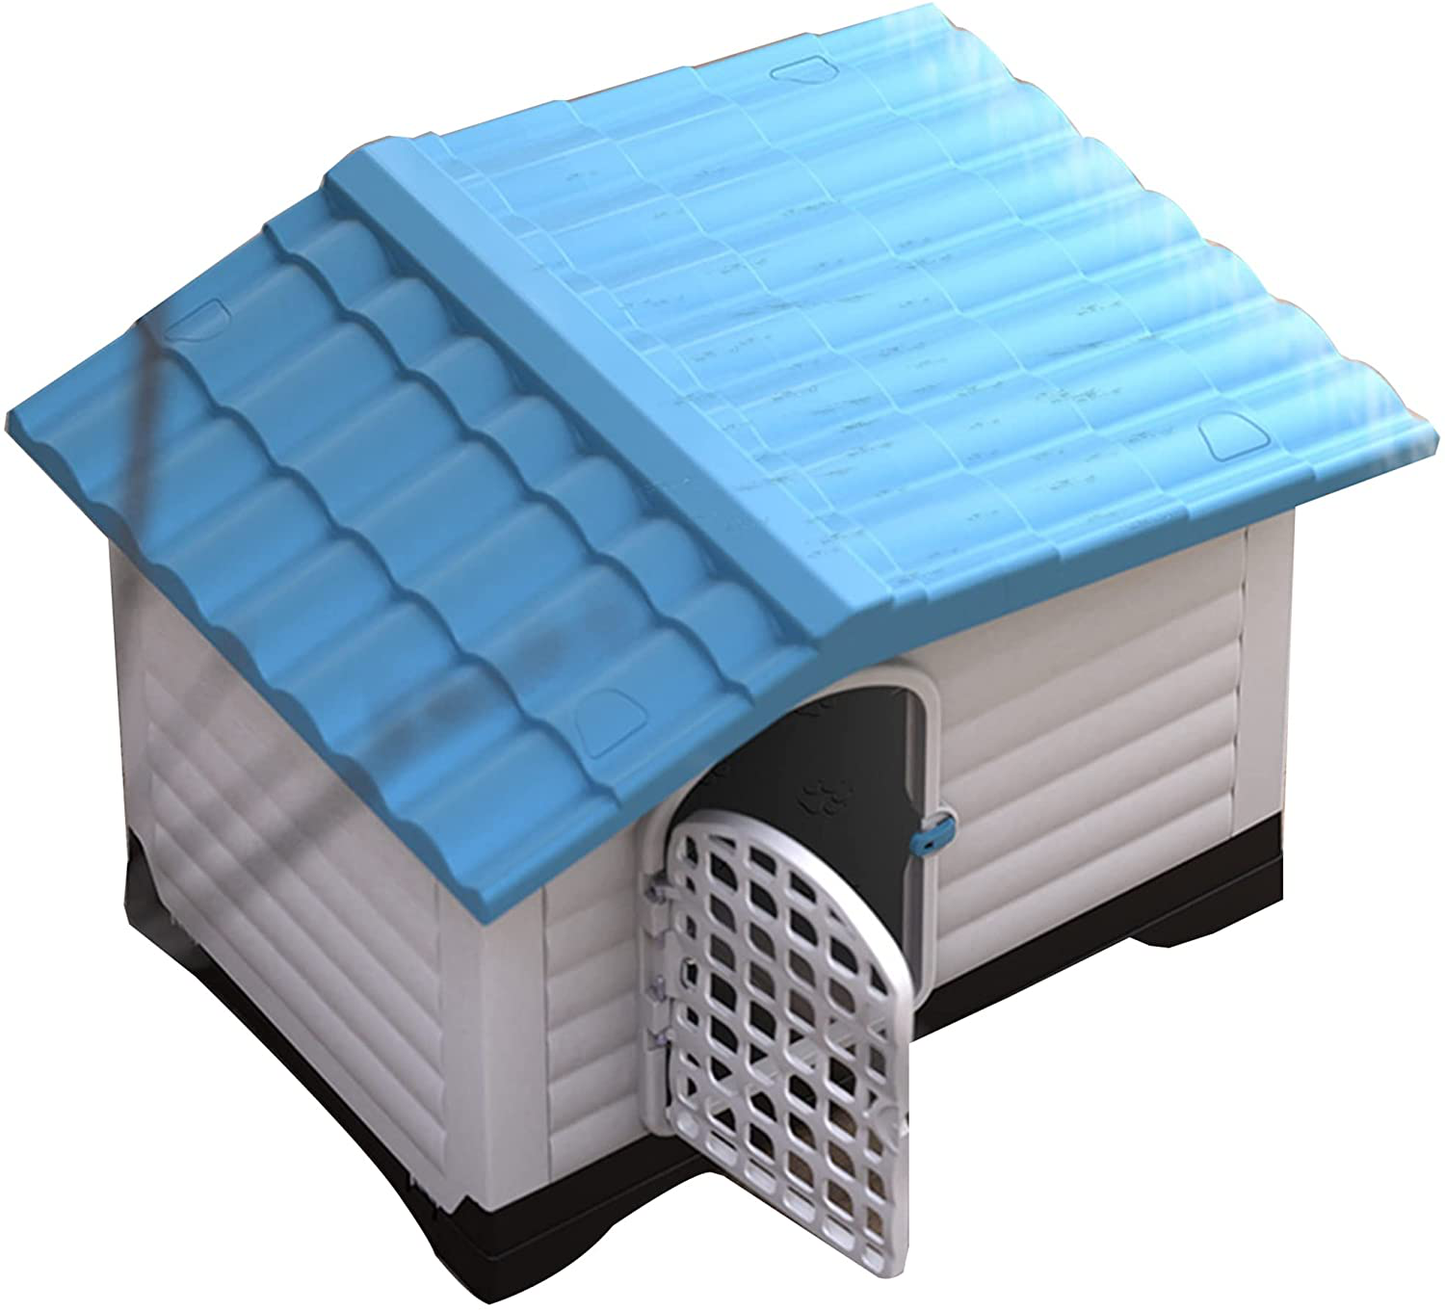 WEIE Plastic Dog Houses, Indoor Outdoor Waterproof Dog Kennel,Insulated Dog House for Small Medium Large Dogs, Easy to Assemble, No Tools Required for Assembly